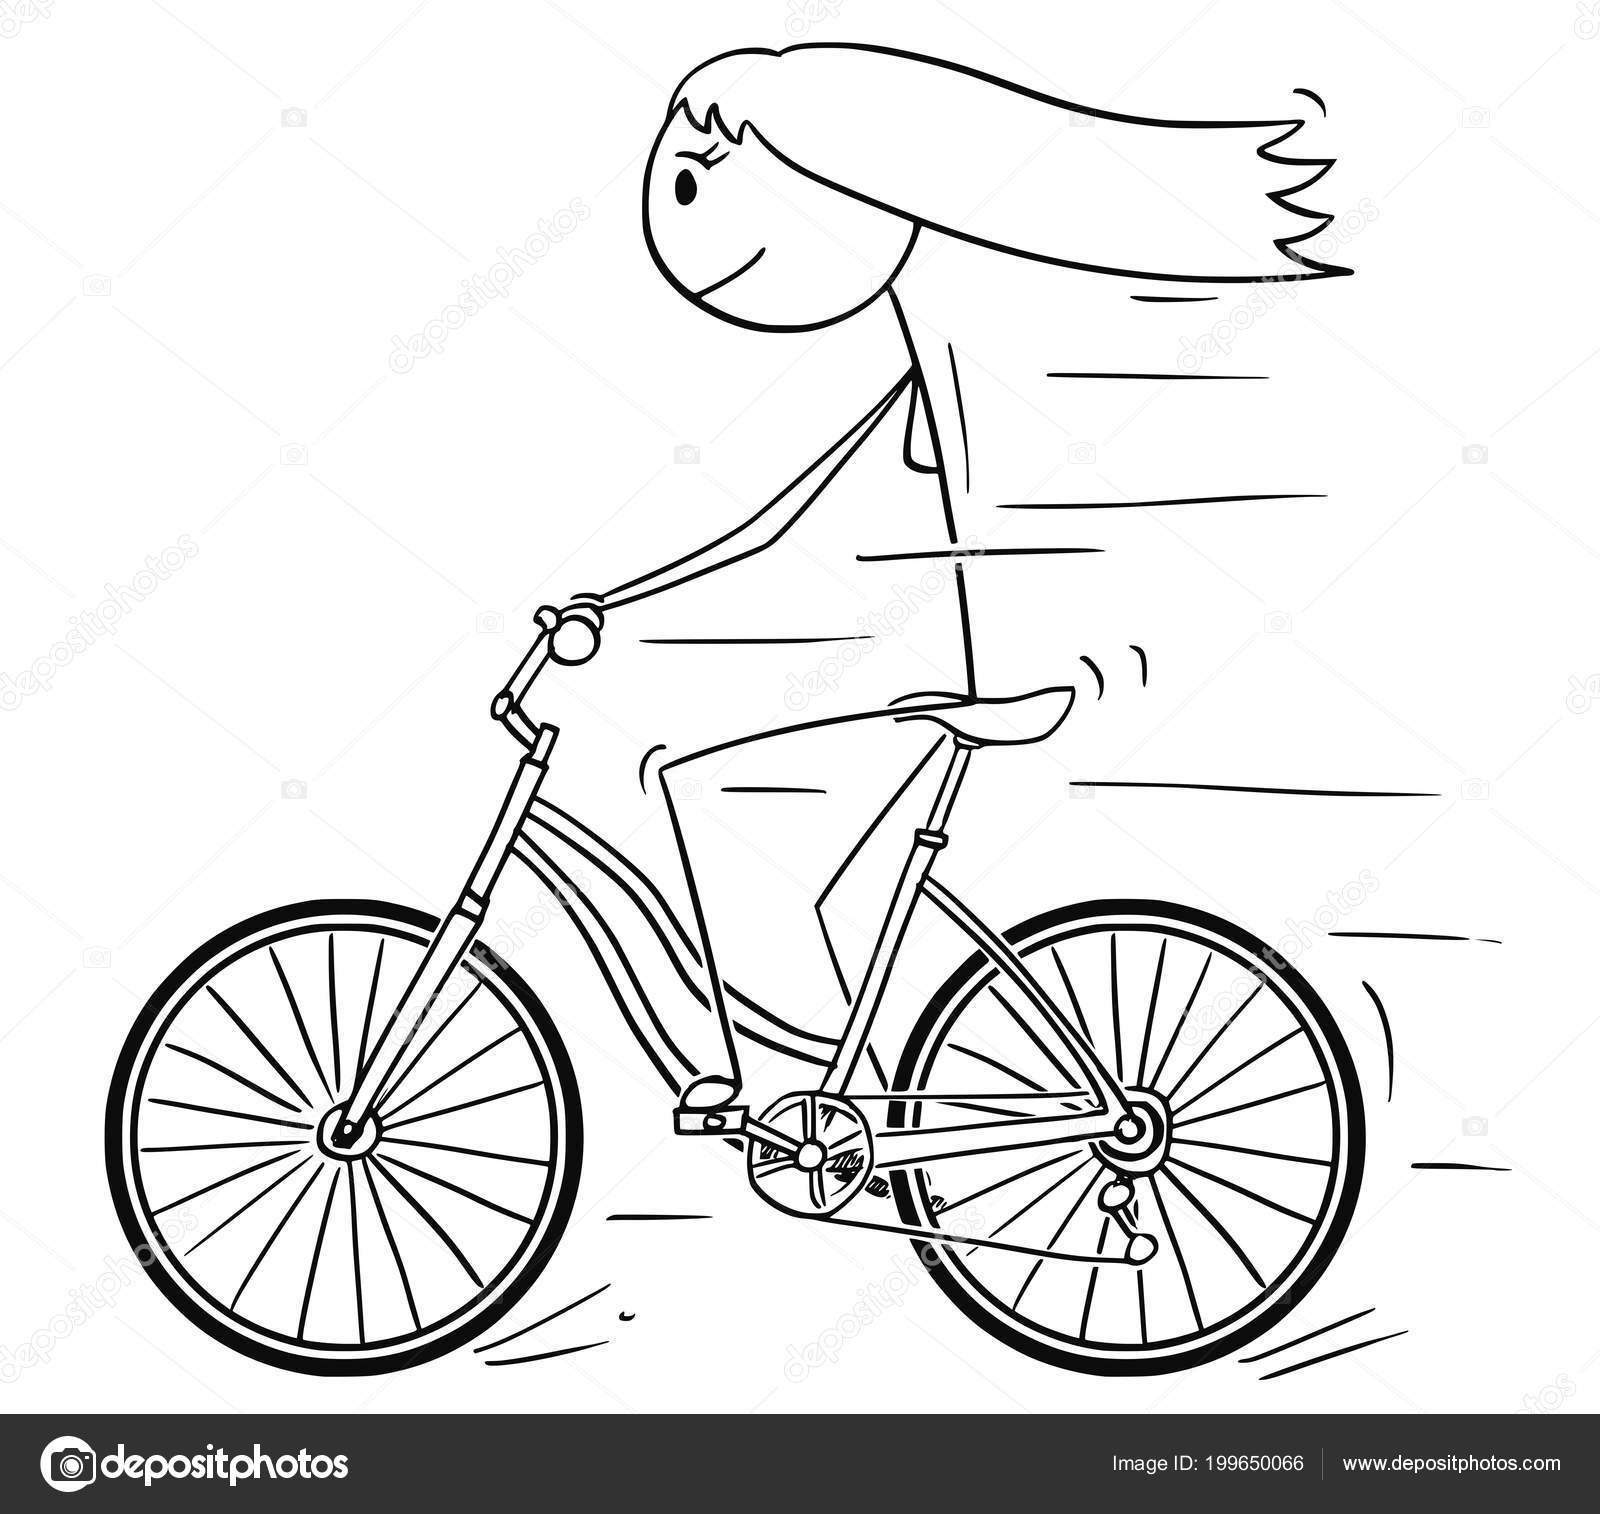 Cartoon Of Woman Or Girl Riding On Bicycle Stock Vector Image By ©ursus 199650066